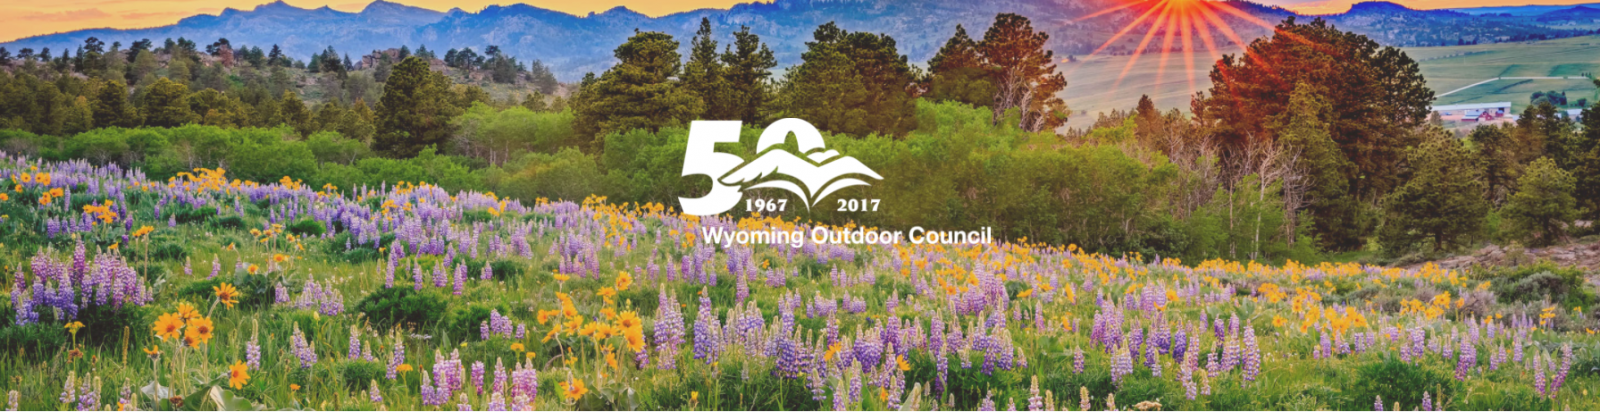 See you in one week for the Outdoor Council’s 50th!